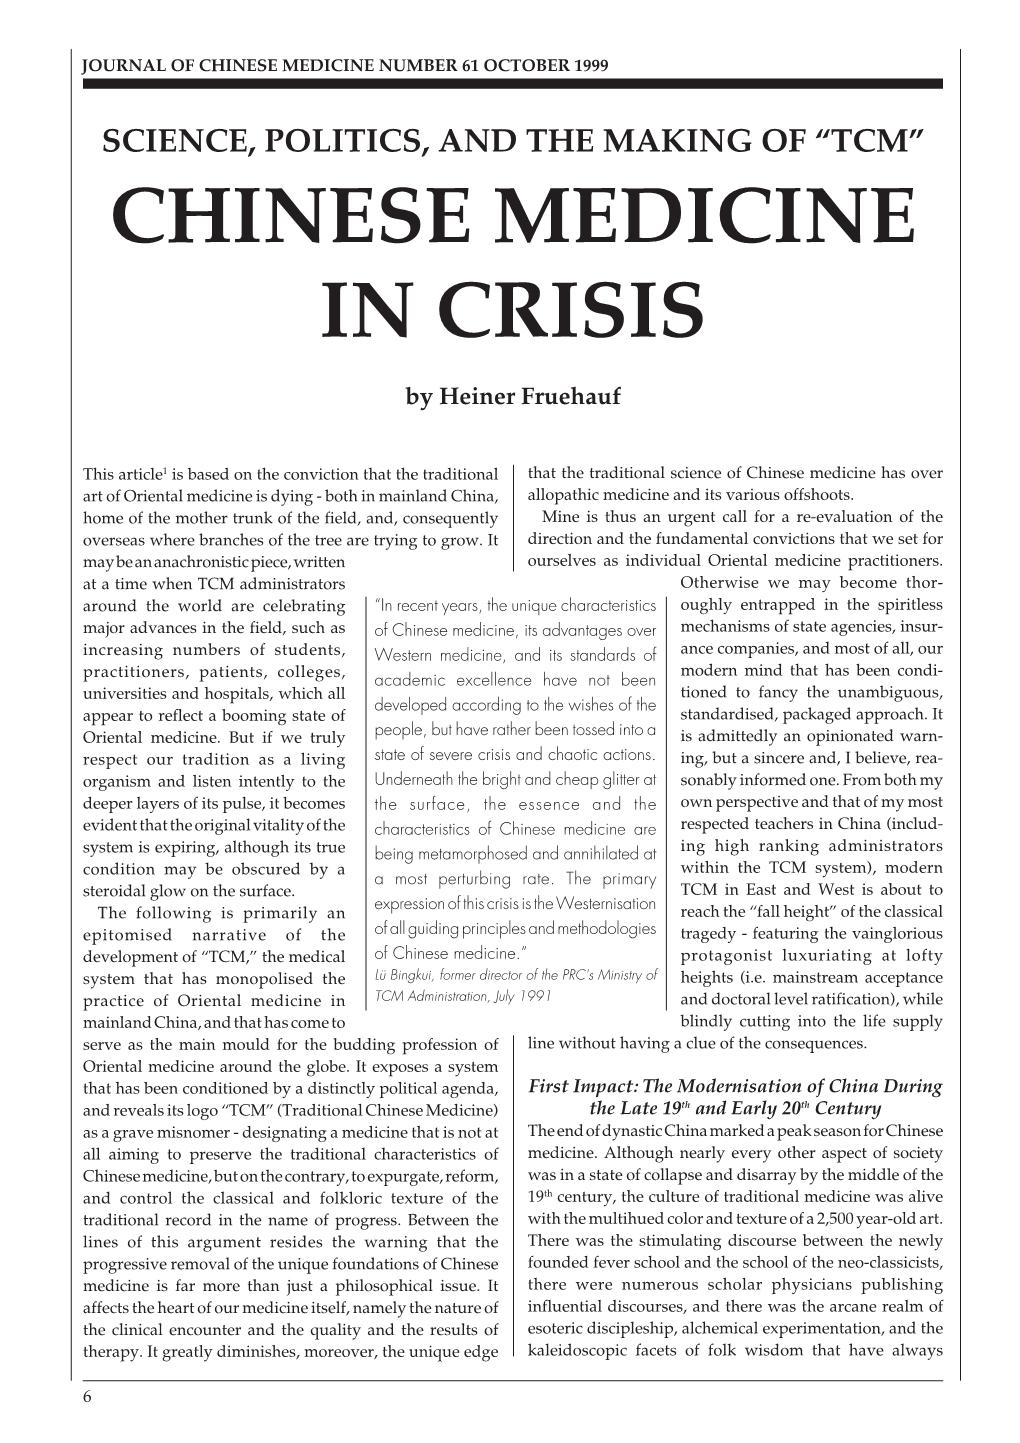 Science, Politics, and the Making of “Tcm” Chinese Medicine in Crisis